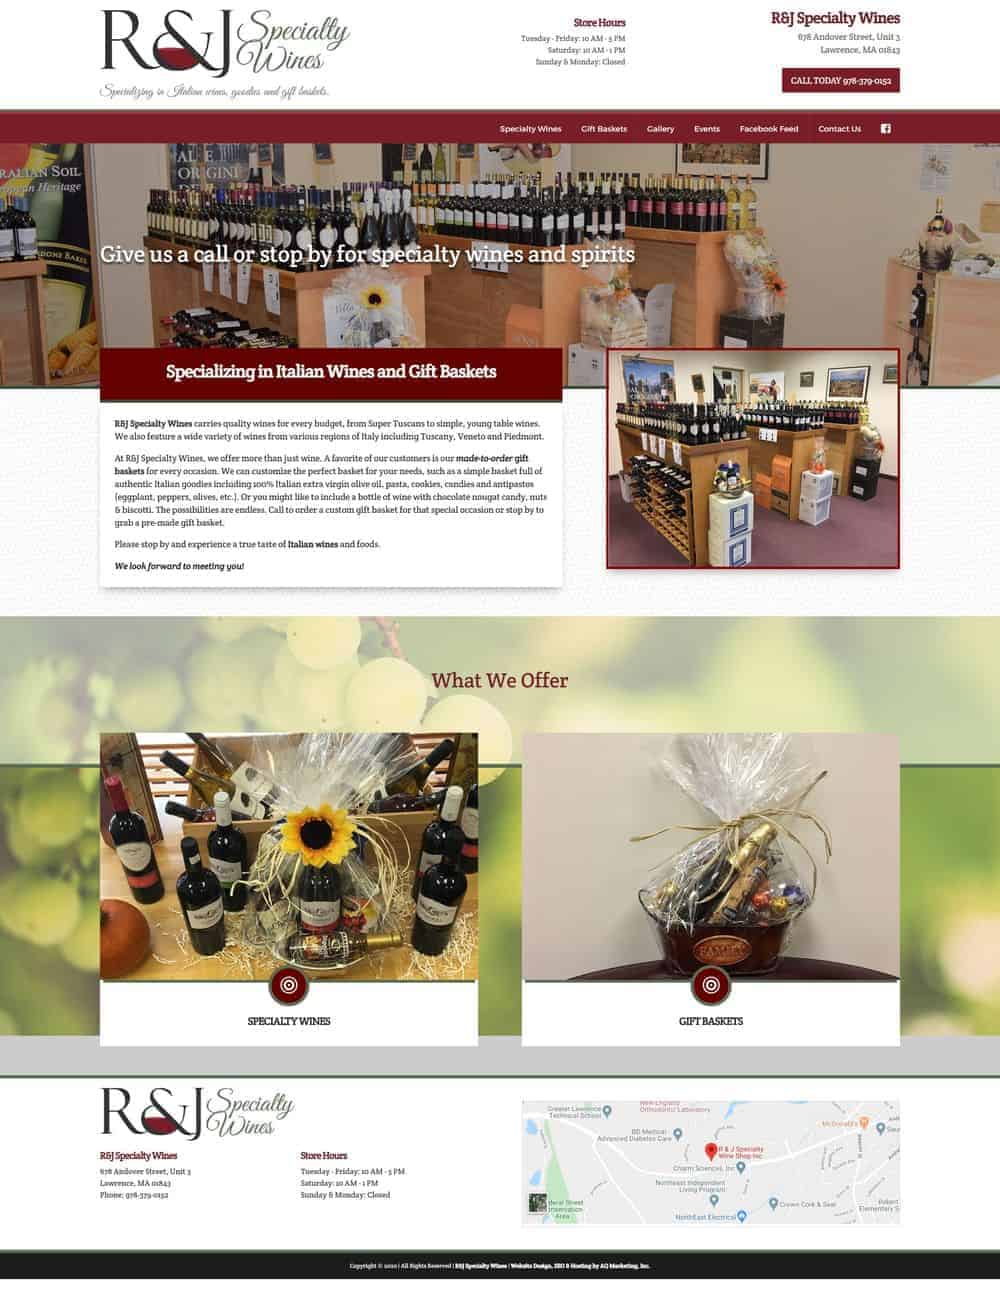 R&J Specialty Wines